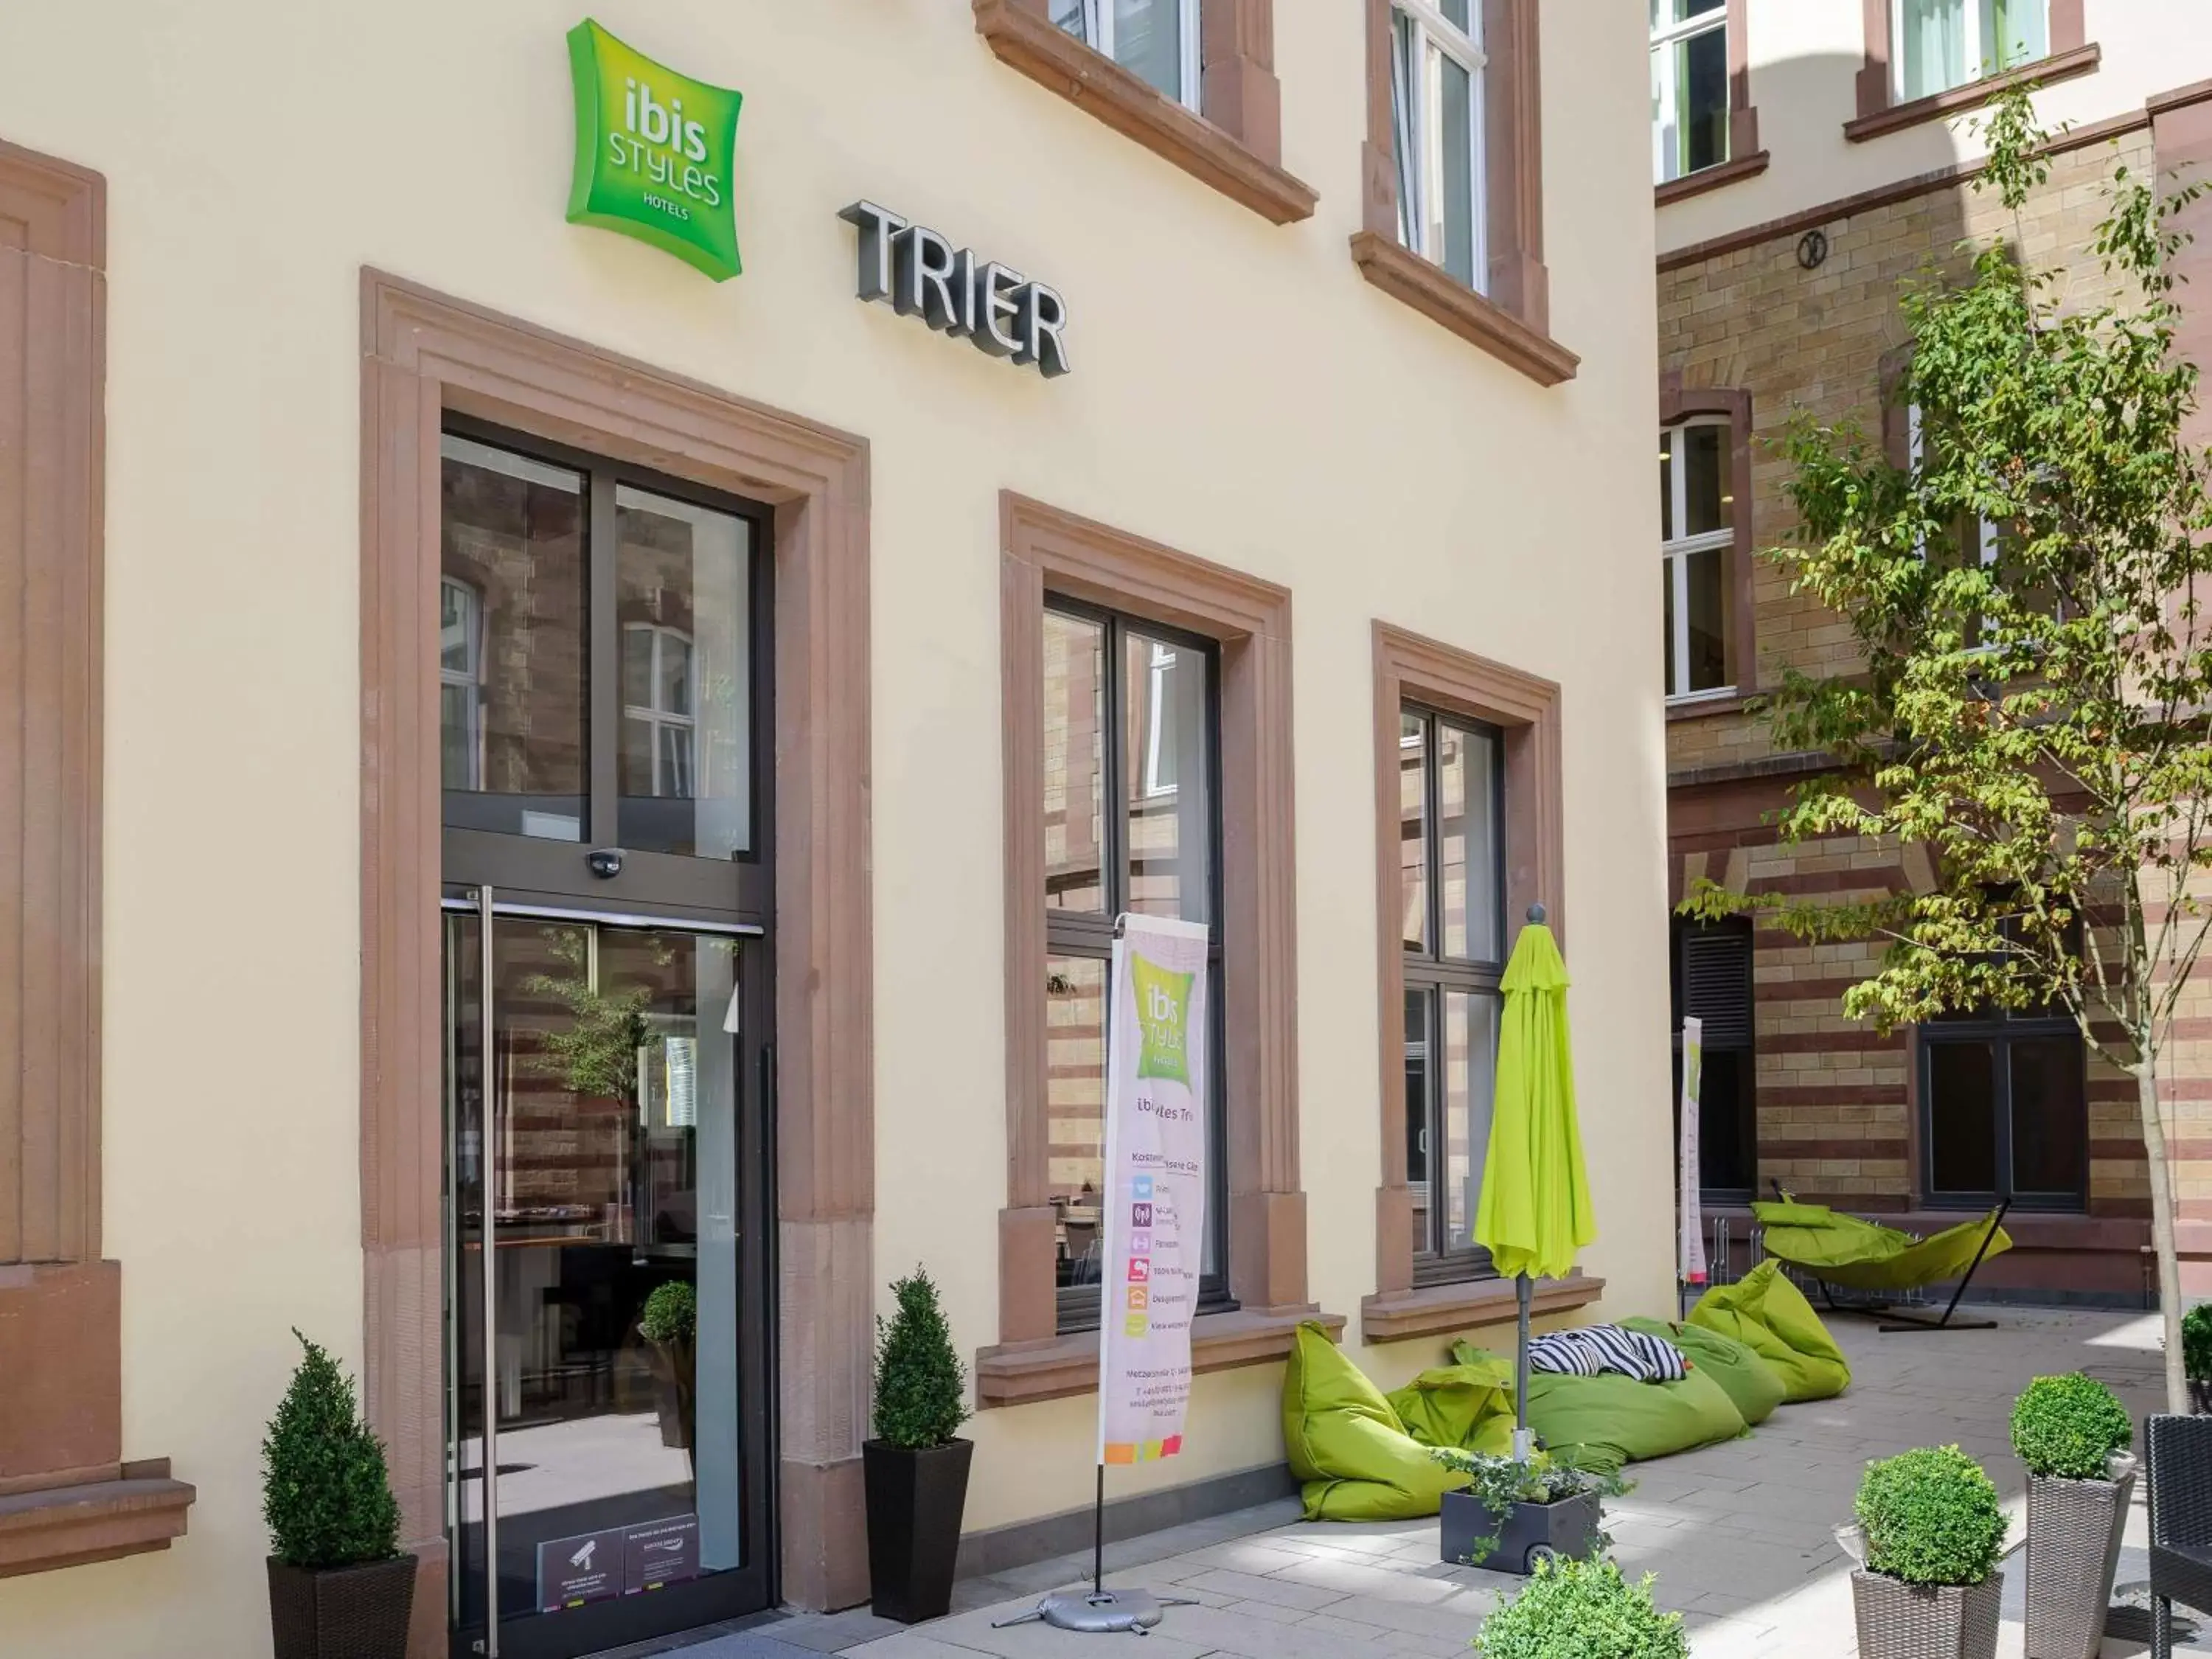 Property building in Ibis Styles Trier